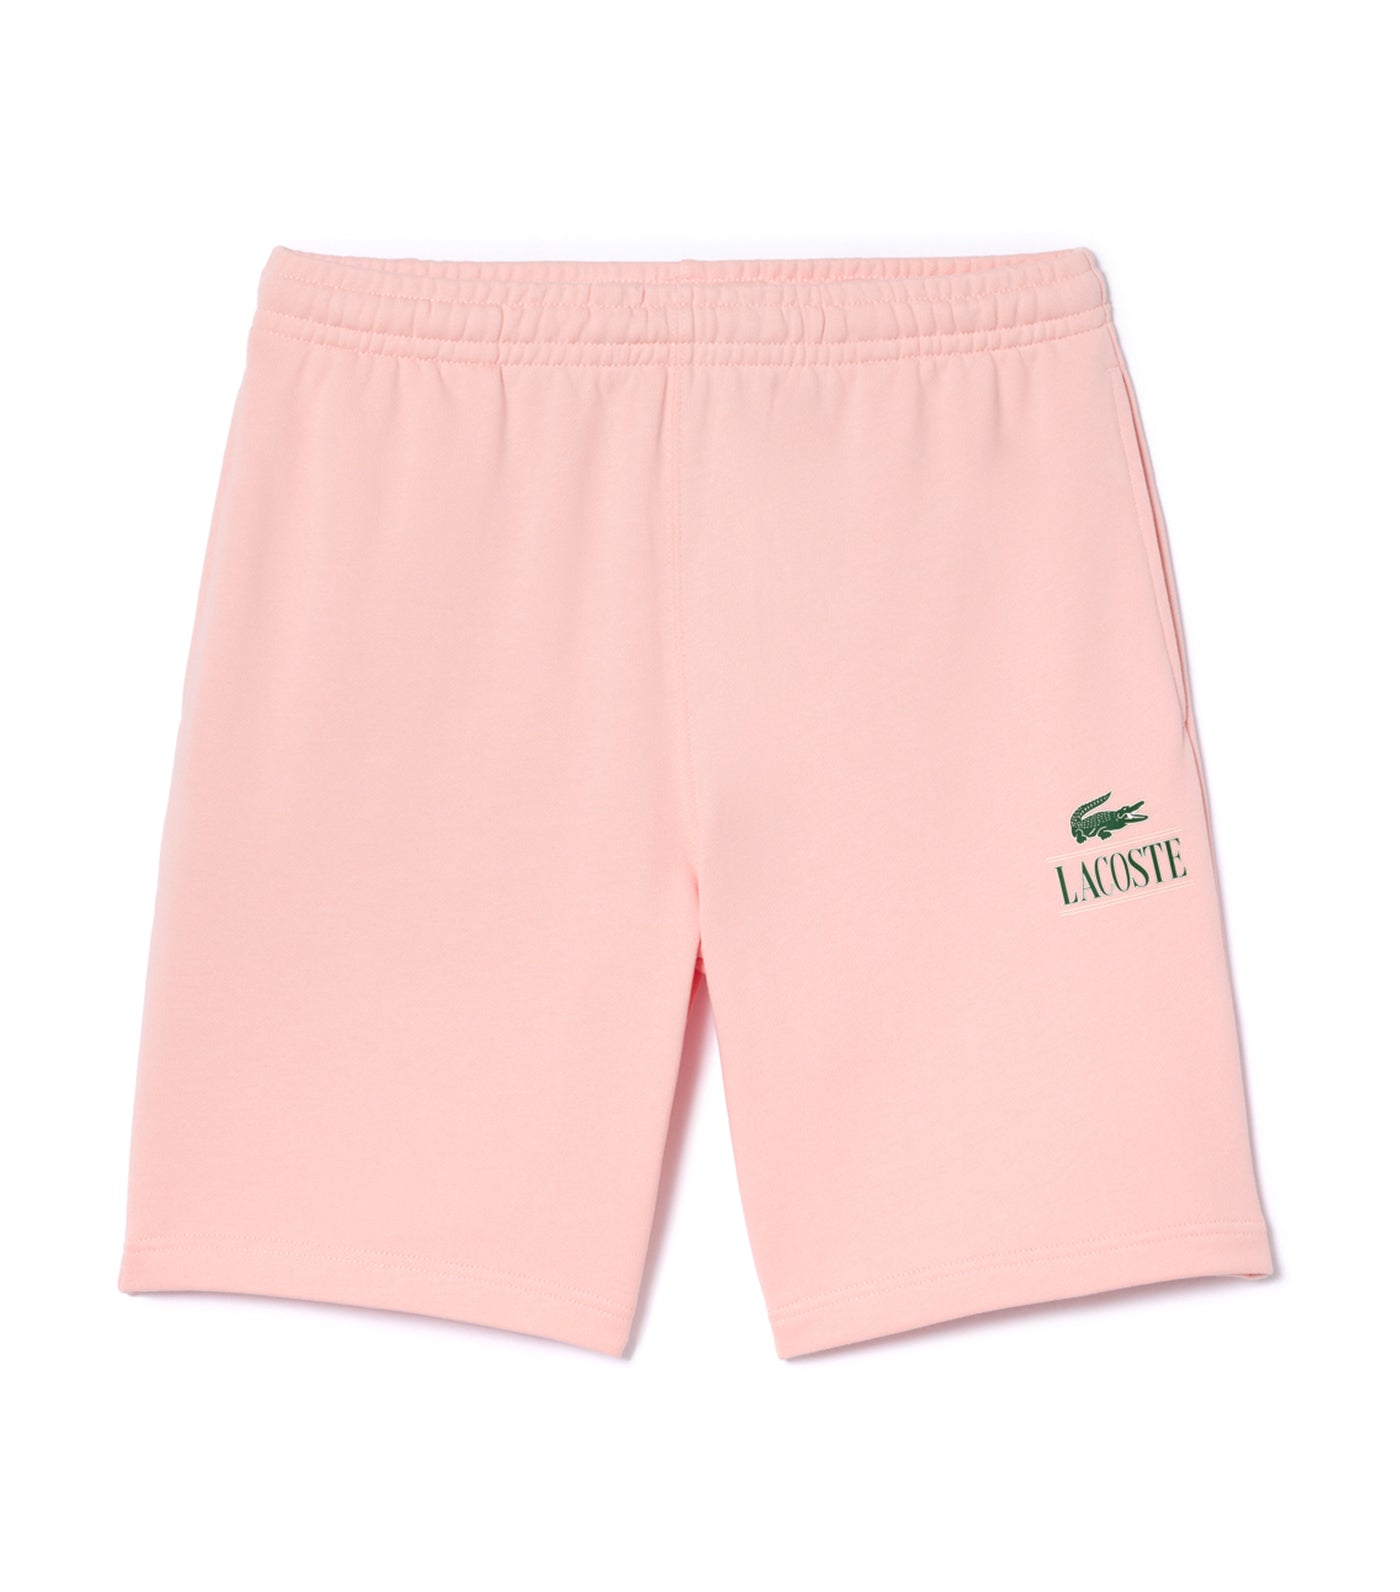 Lacoste Signature Print Jogger Shorts Waterlily